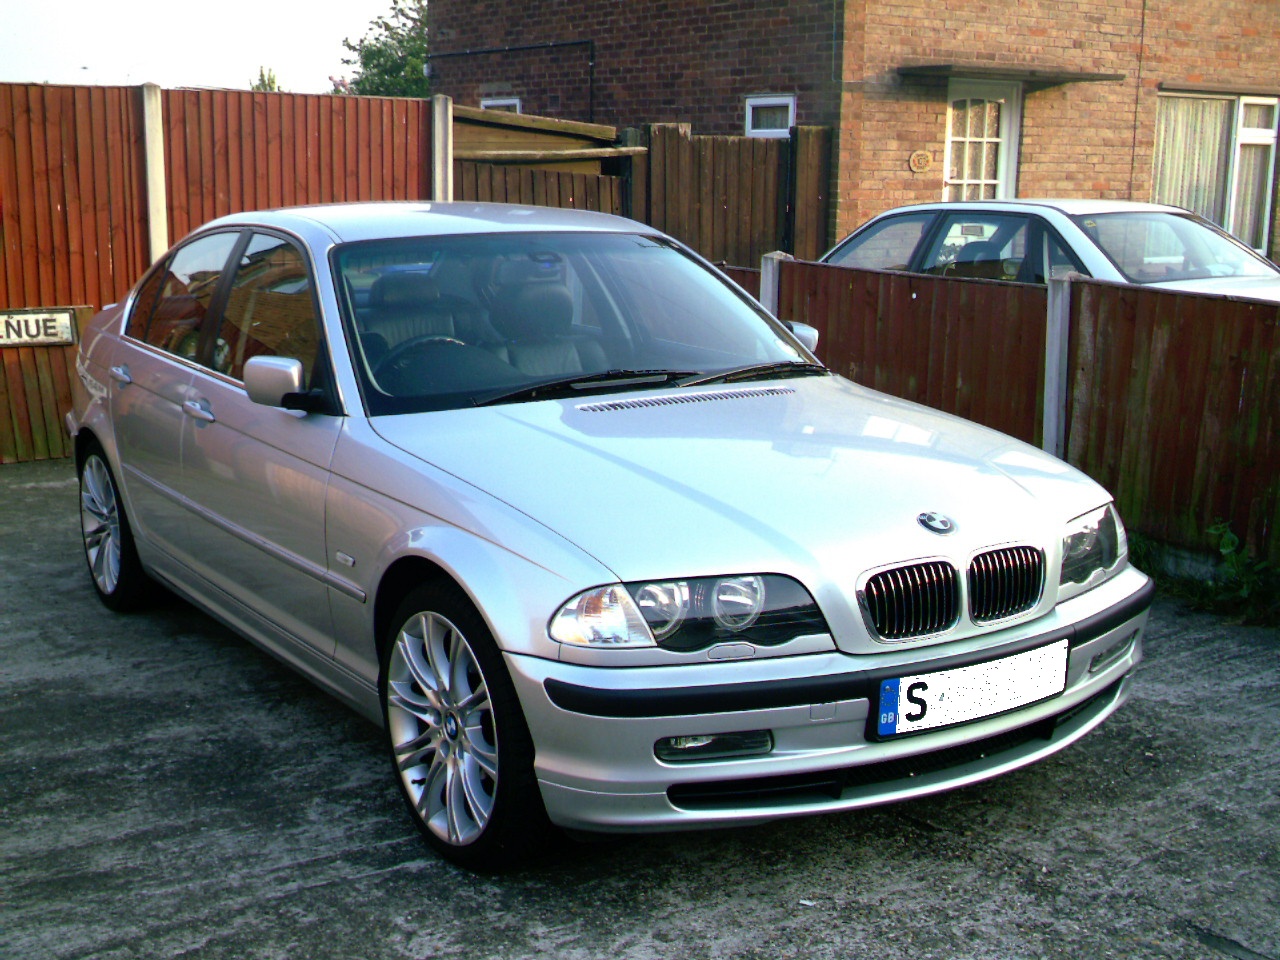 1999 Bmw 328is reviews #4